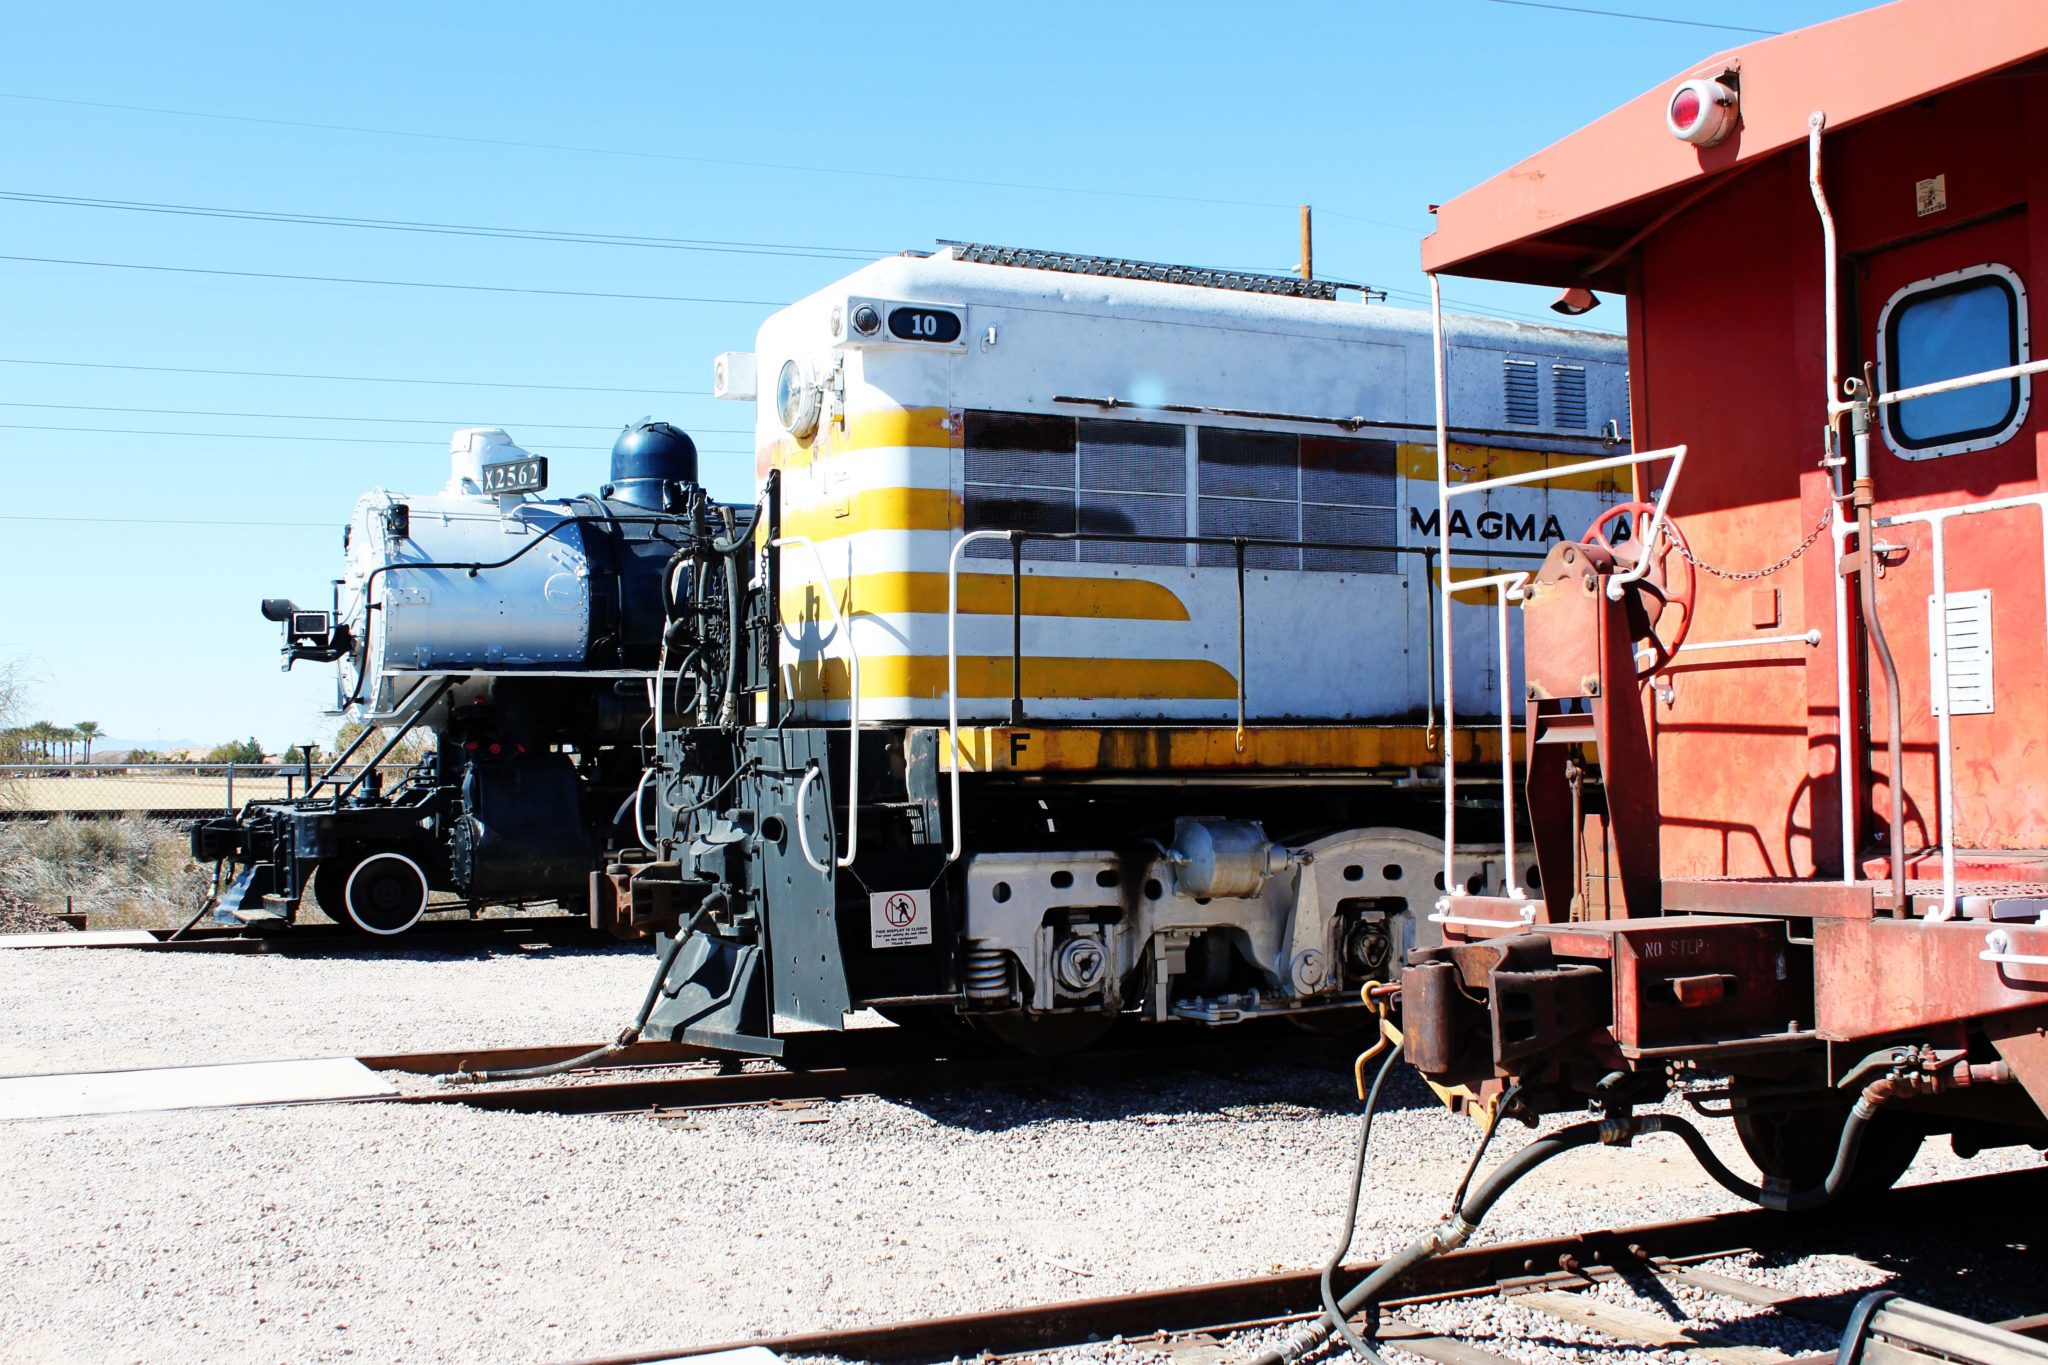 Kids will love exploring the train yard at the Arizona Railway Museum- 101 East Valley and Phoenix Kids activities #phoenix #arizona #azrailwaymuseum